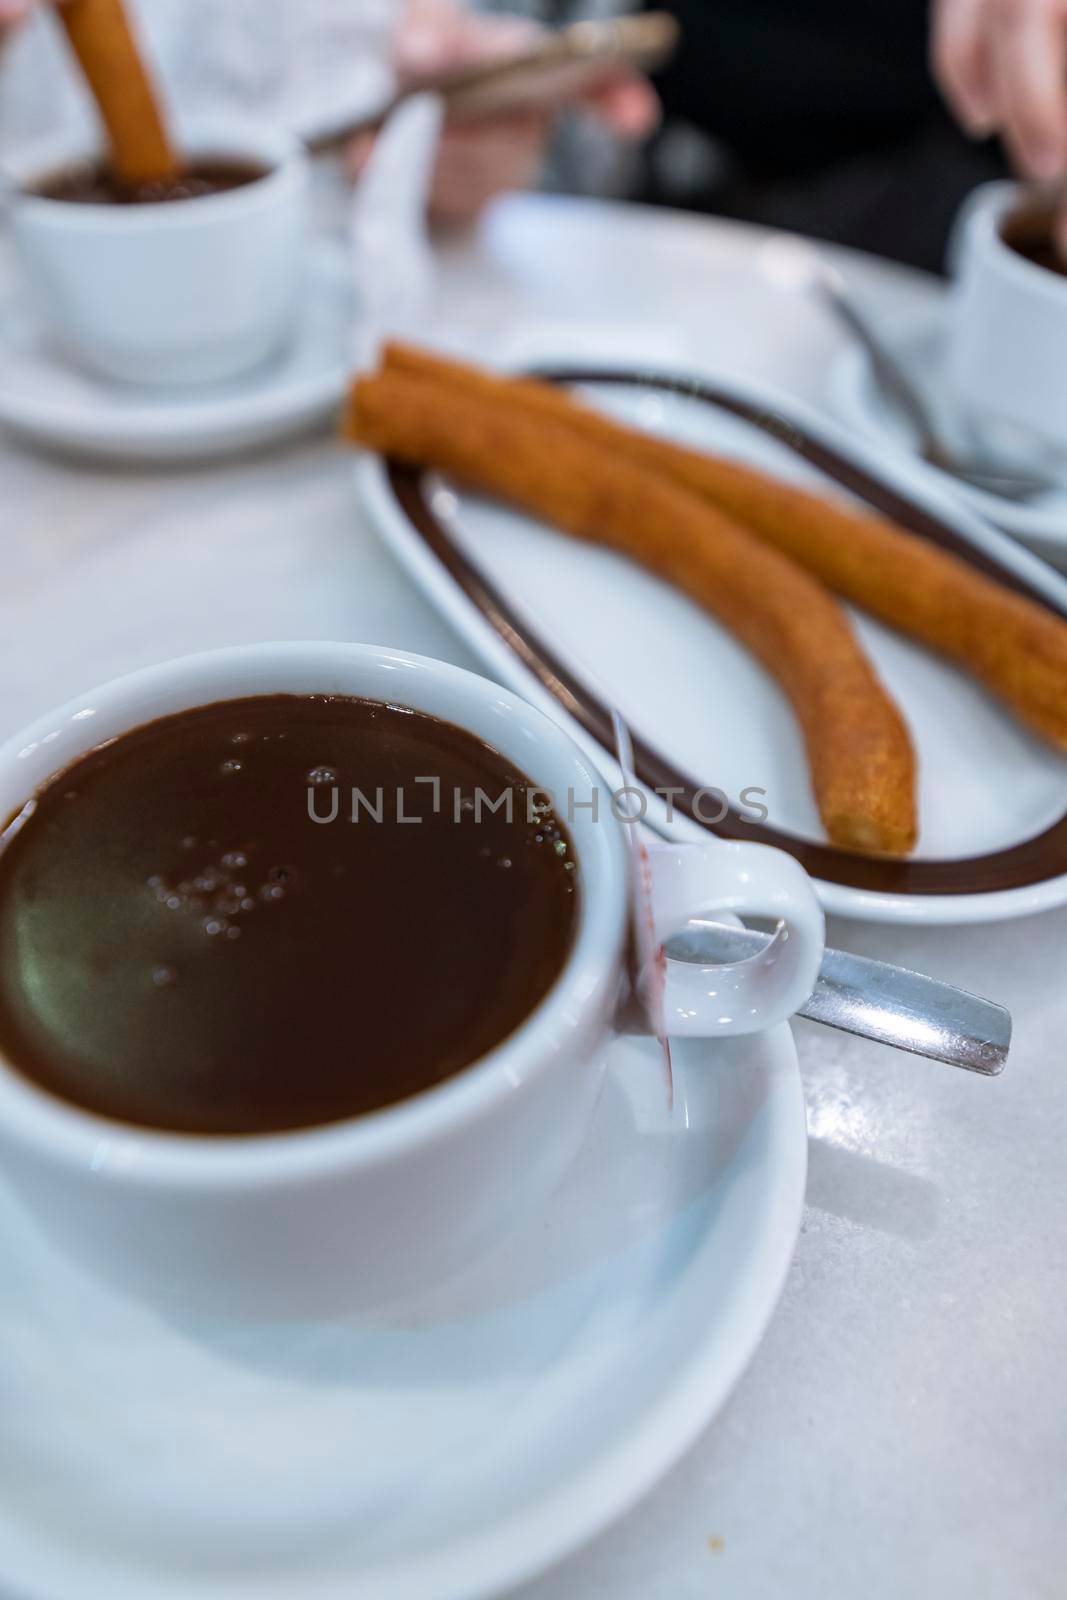 In Spain it is very typical to have chocolate with churros for breakfast.